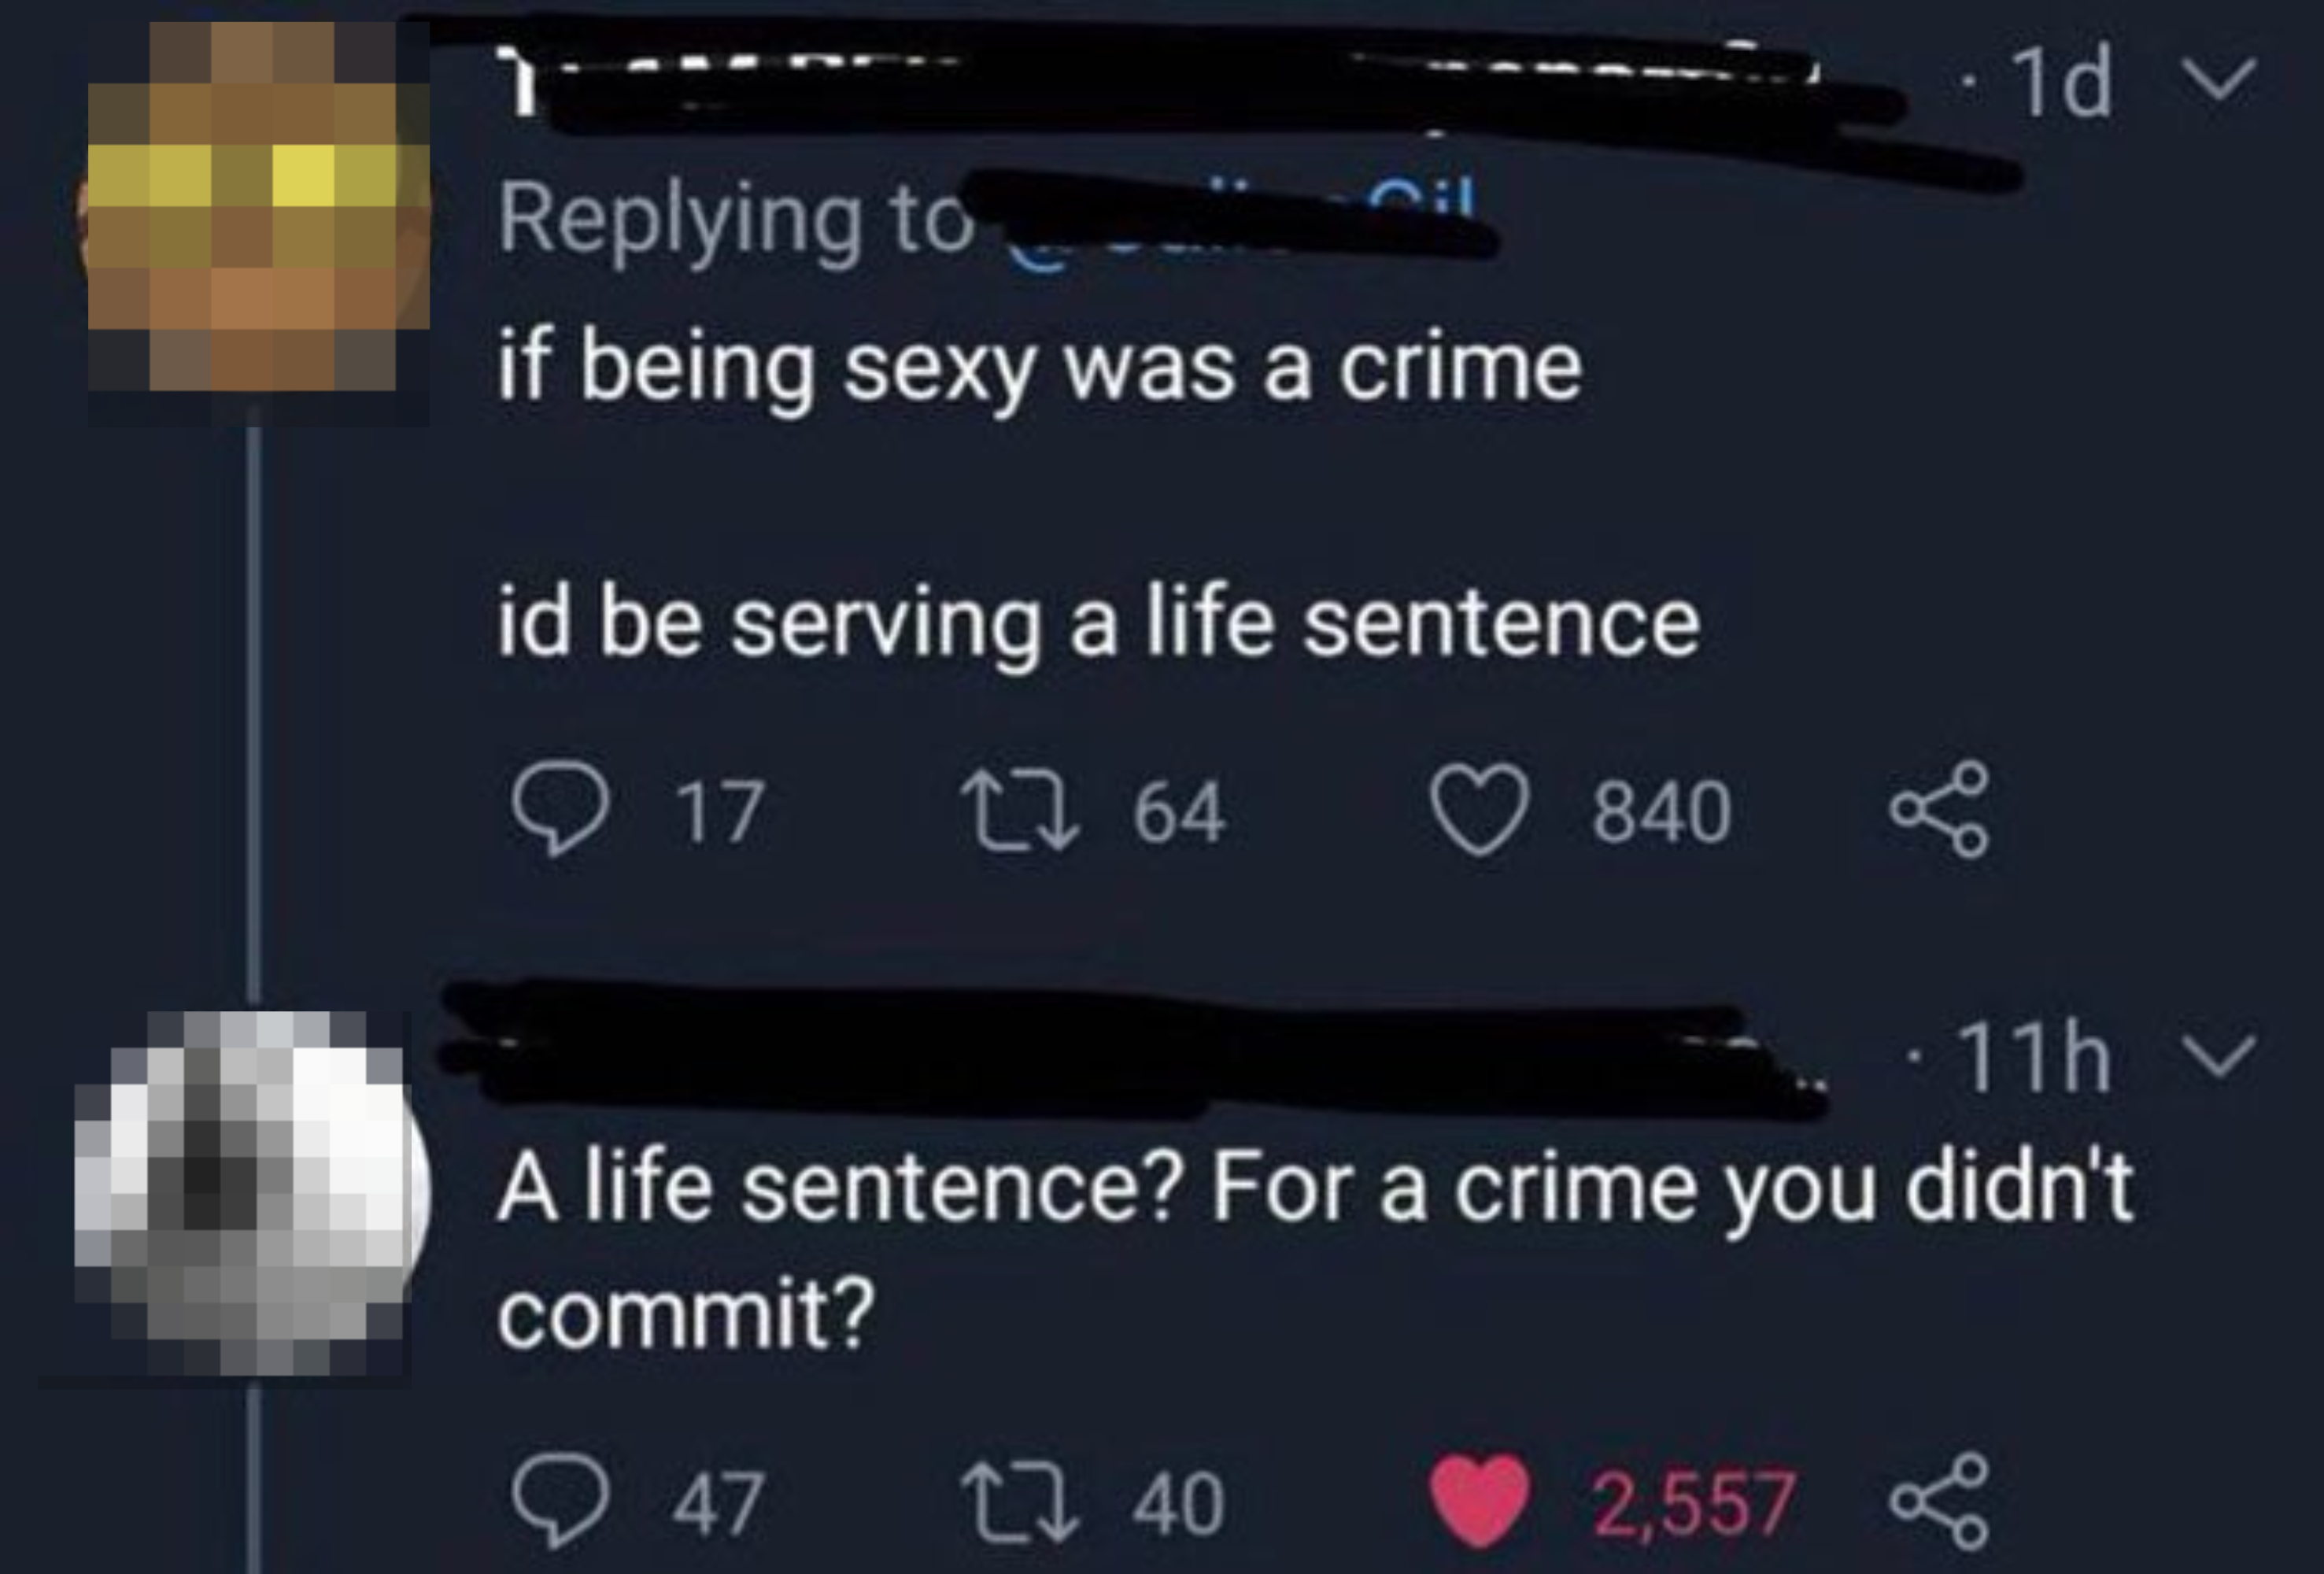 &quot;If being sexy was a crime, I&#x27;d be serving a life sentence&quot;; response: &quot;A life sentence? For a crime you didn&#x27;t commit?&quot;